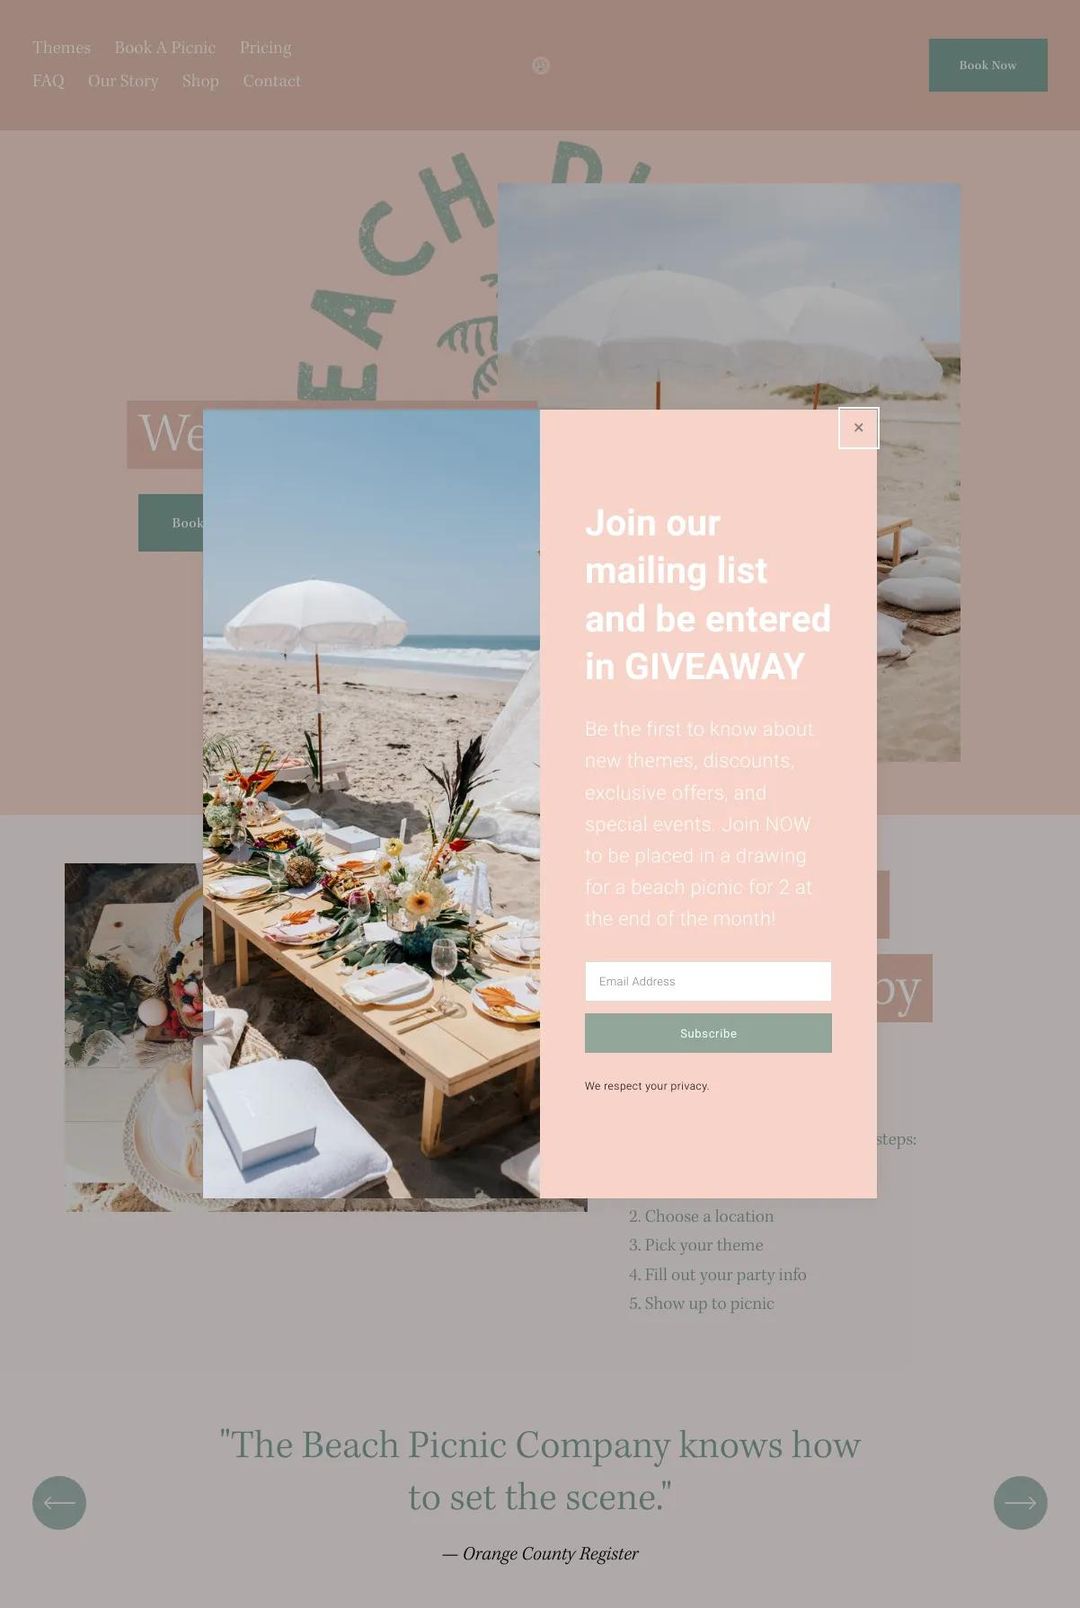 Screenshot 1 of The Beach Picnic Company (Example Squarespace Ecommerce Website)